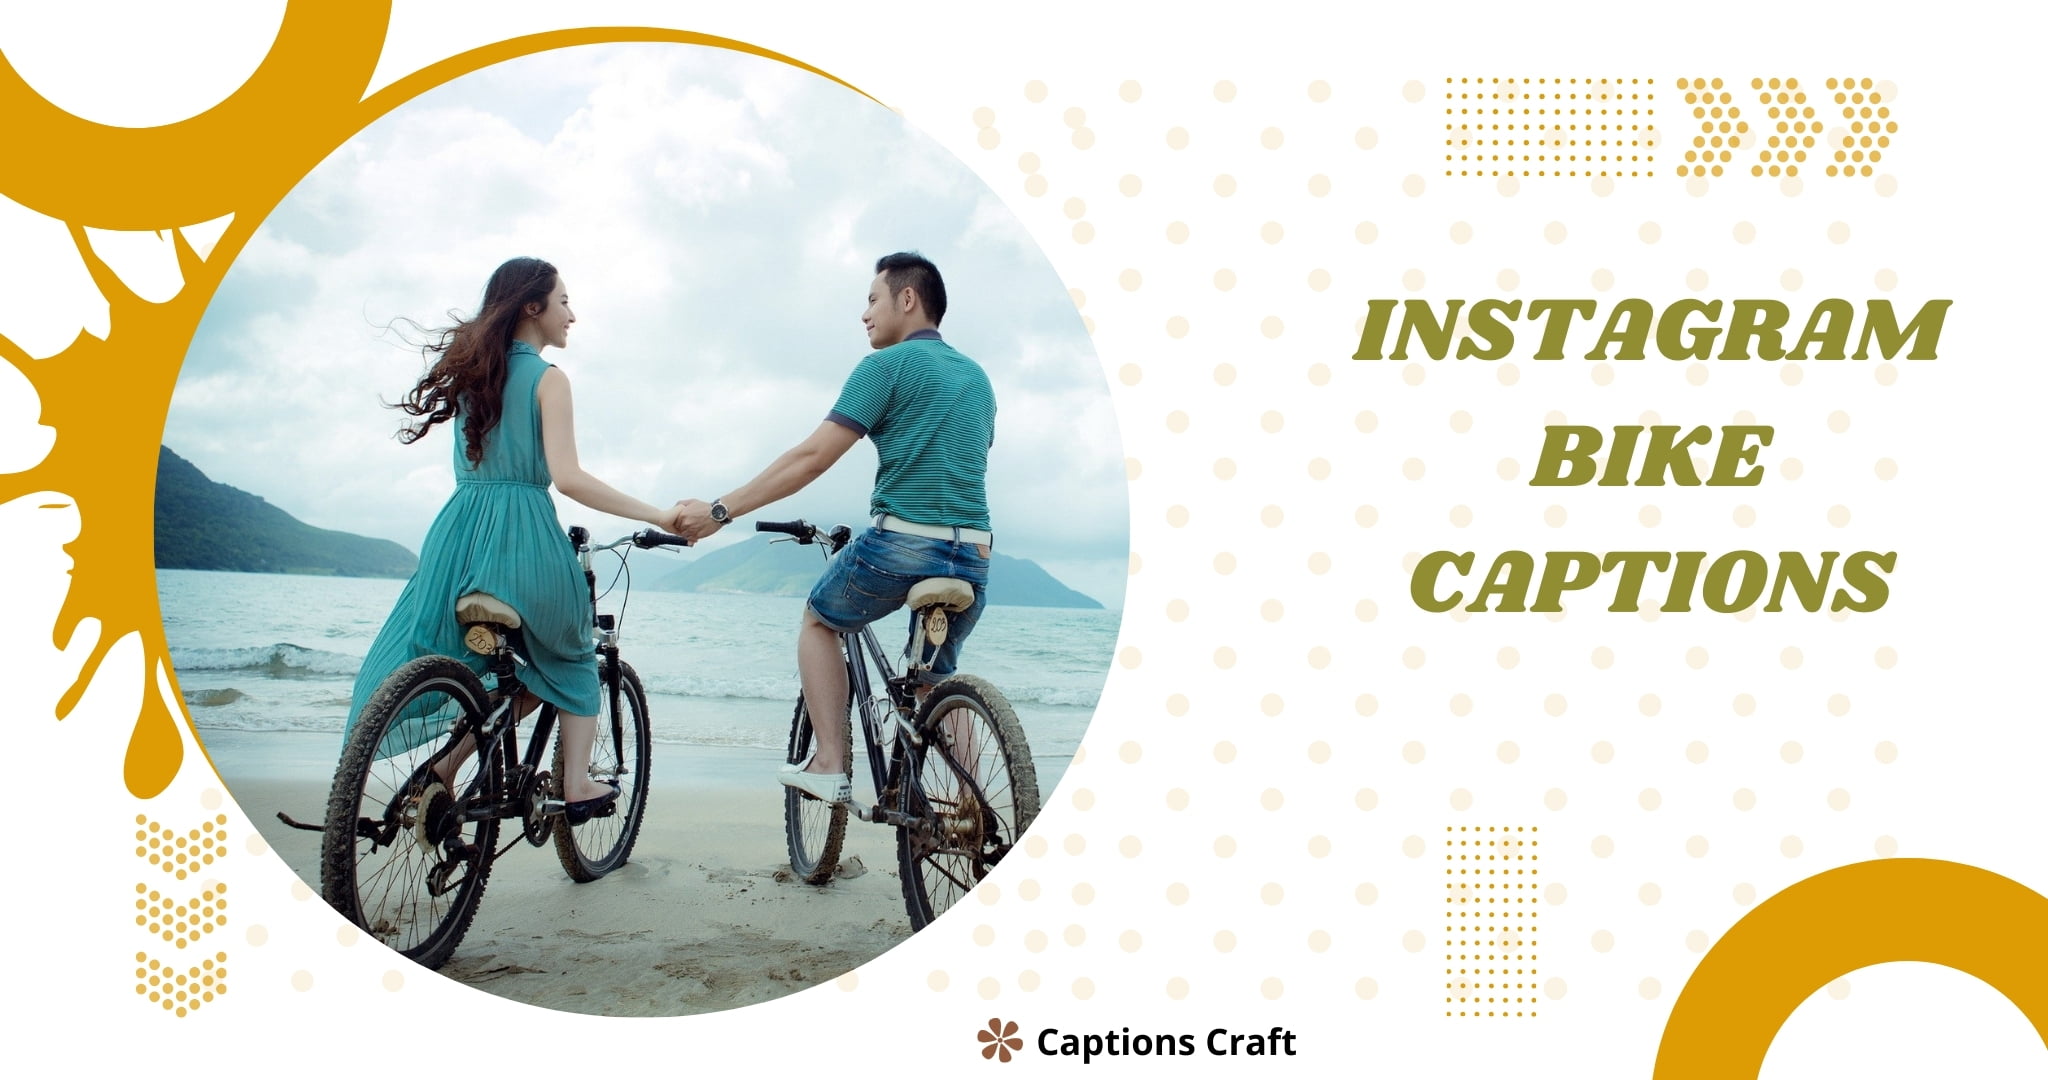 A collection of creative Instagram bike captions for your cycling adventures. Get inspired and share your love for biking with these catchy captions. #BikeLife